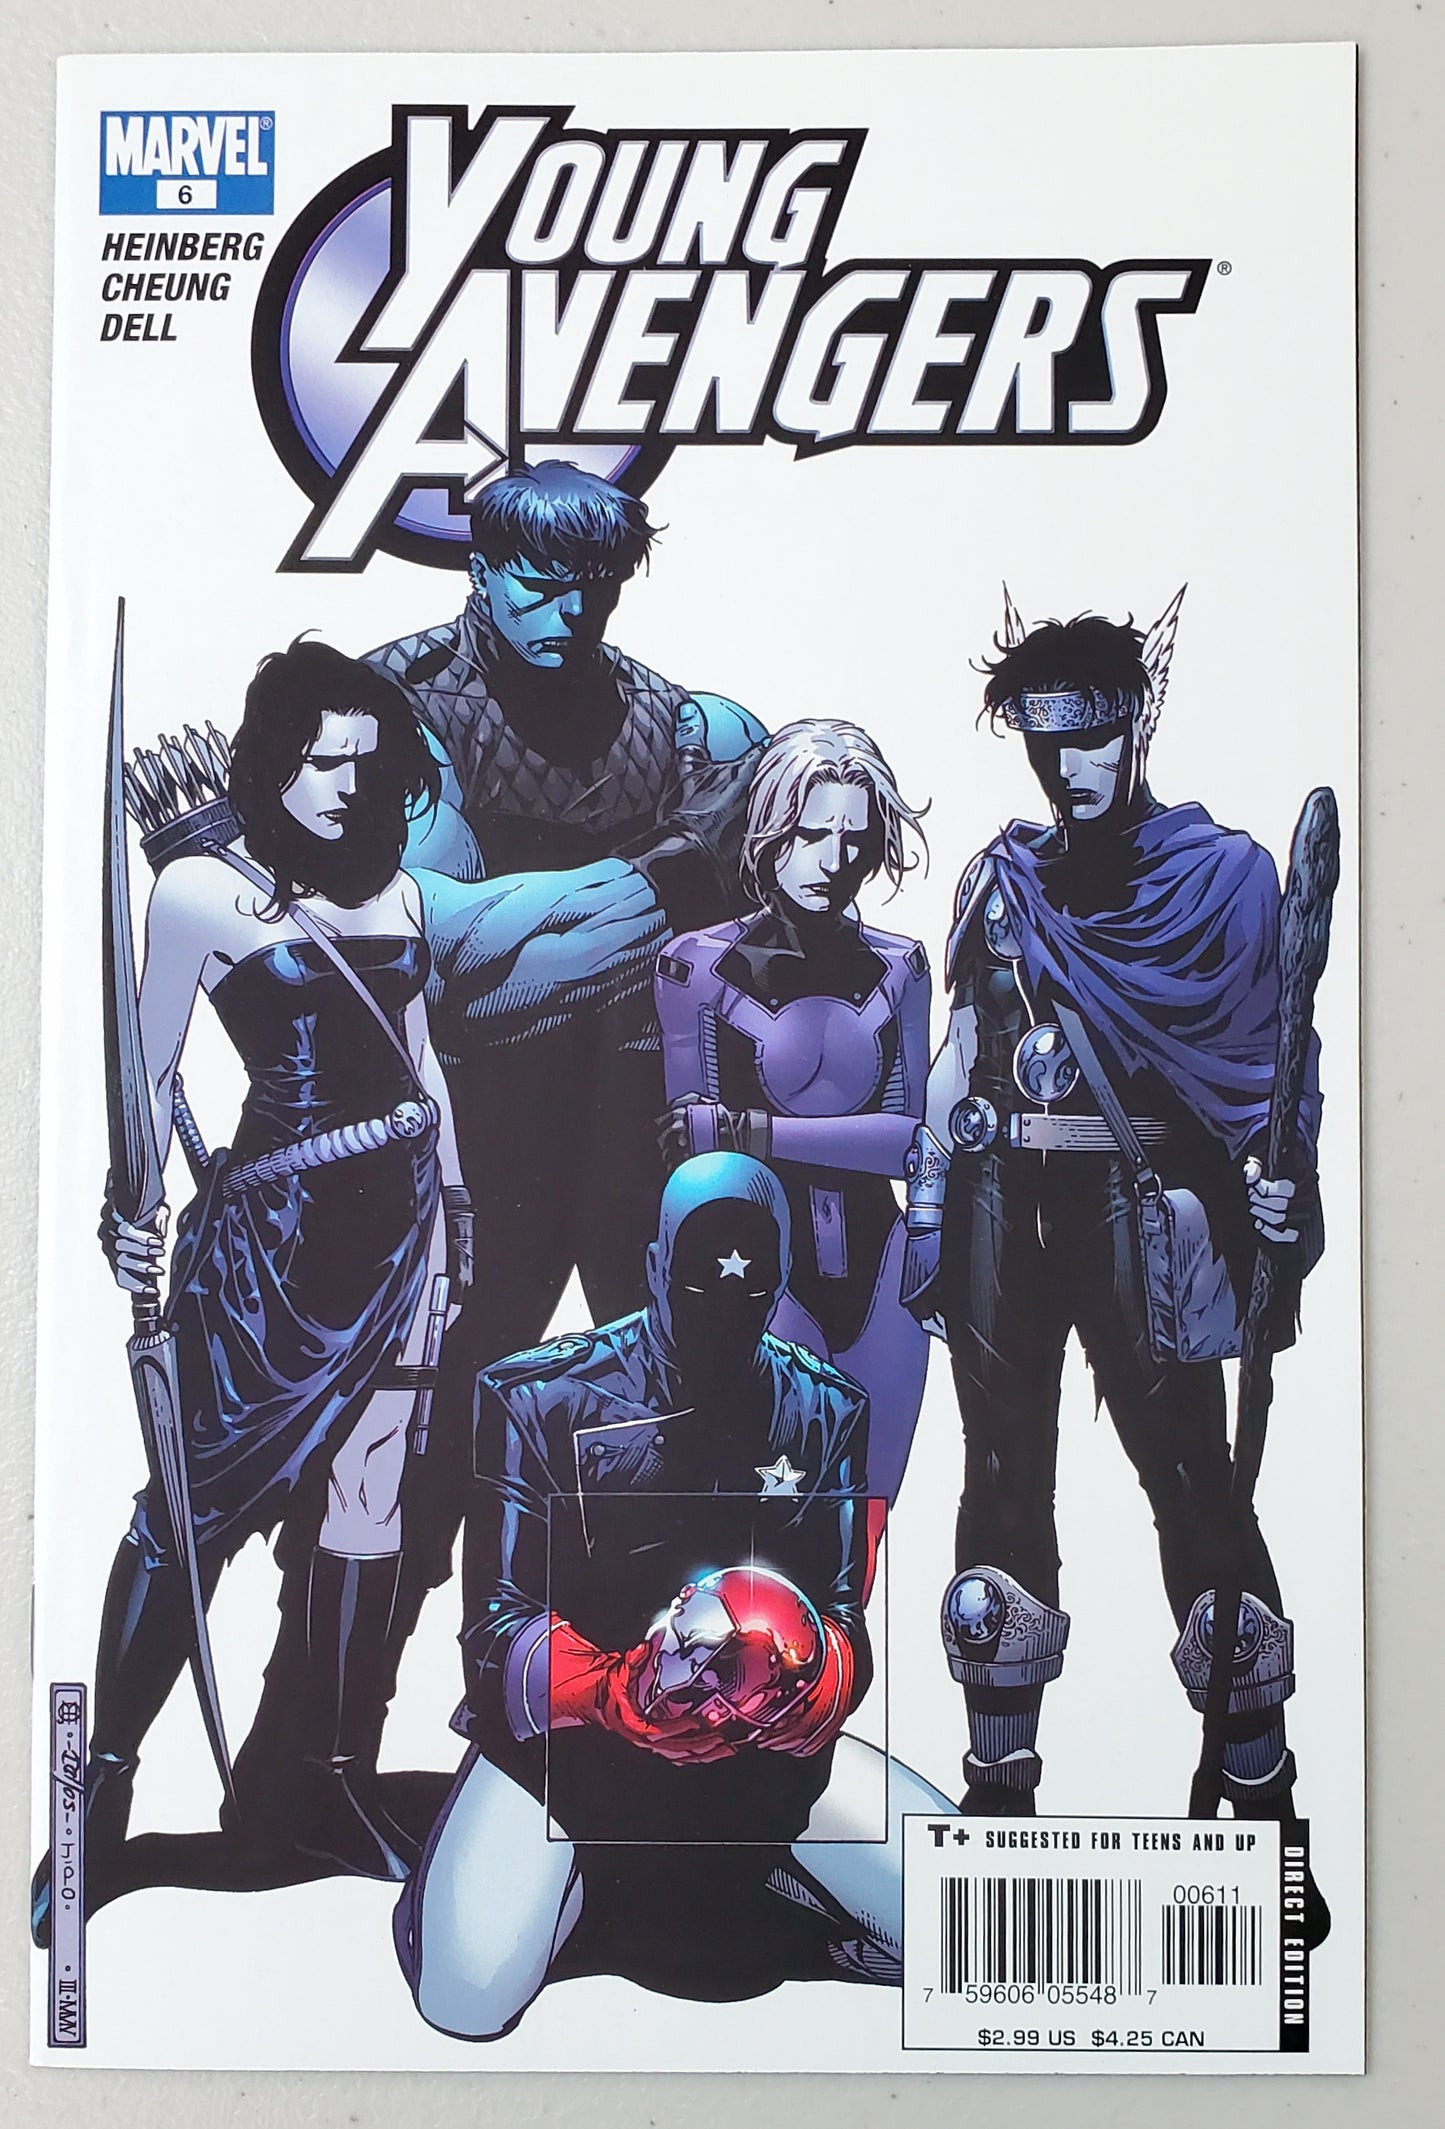 YOUNG AVENGERS #6 (1ST APP CASSIE LANG AS STATURE)